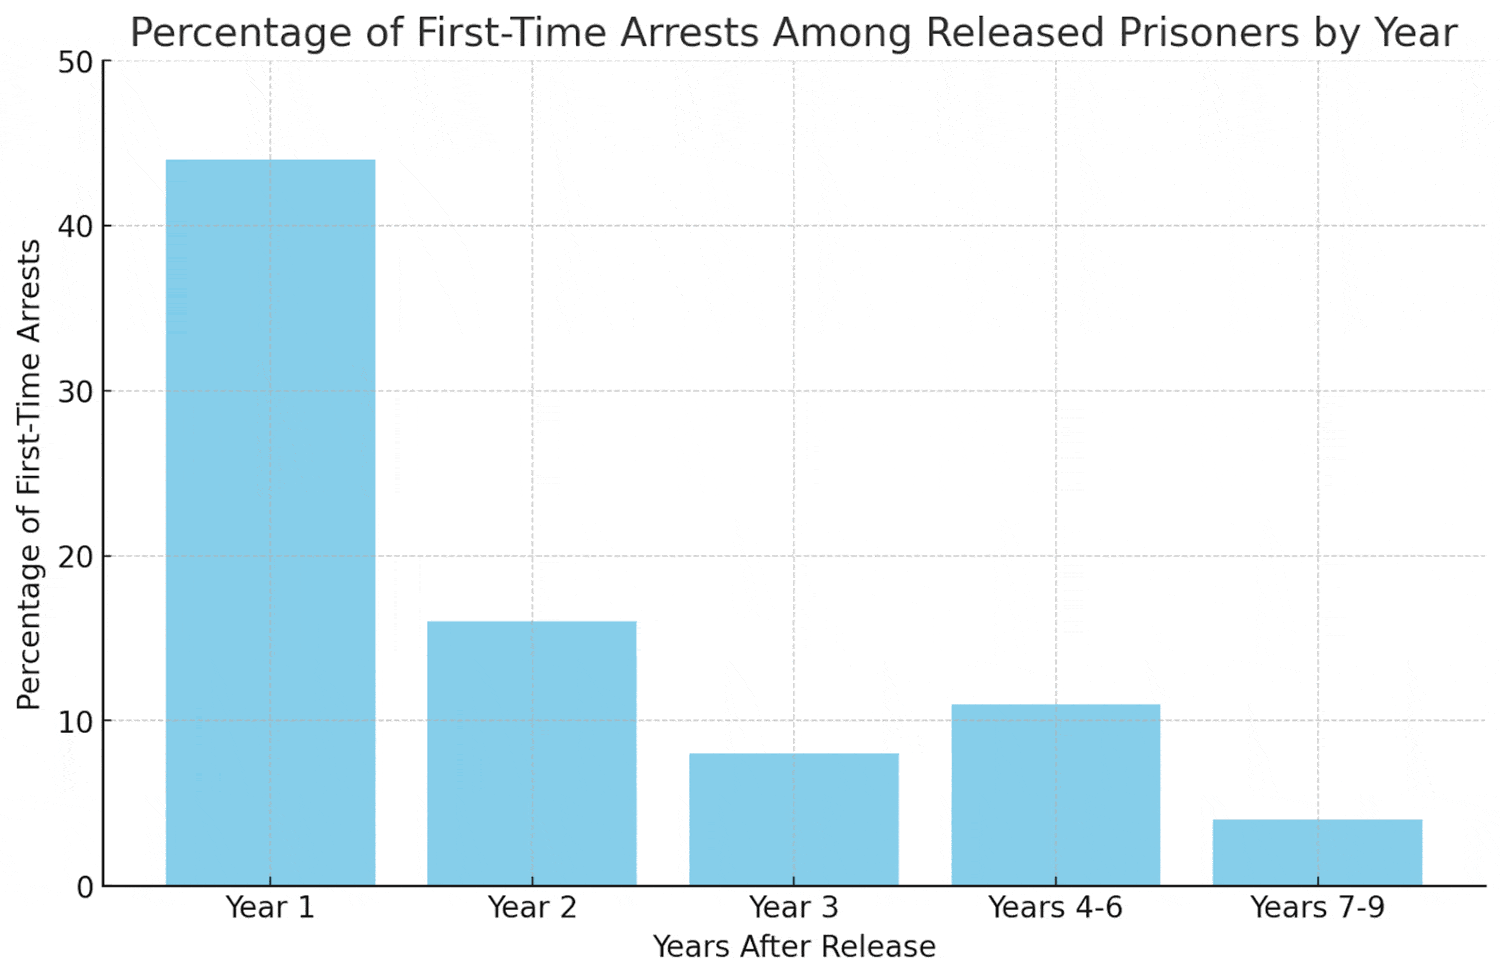 Percentage of first-time arrests among released prisoners by year